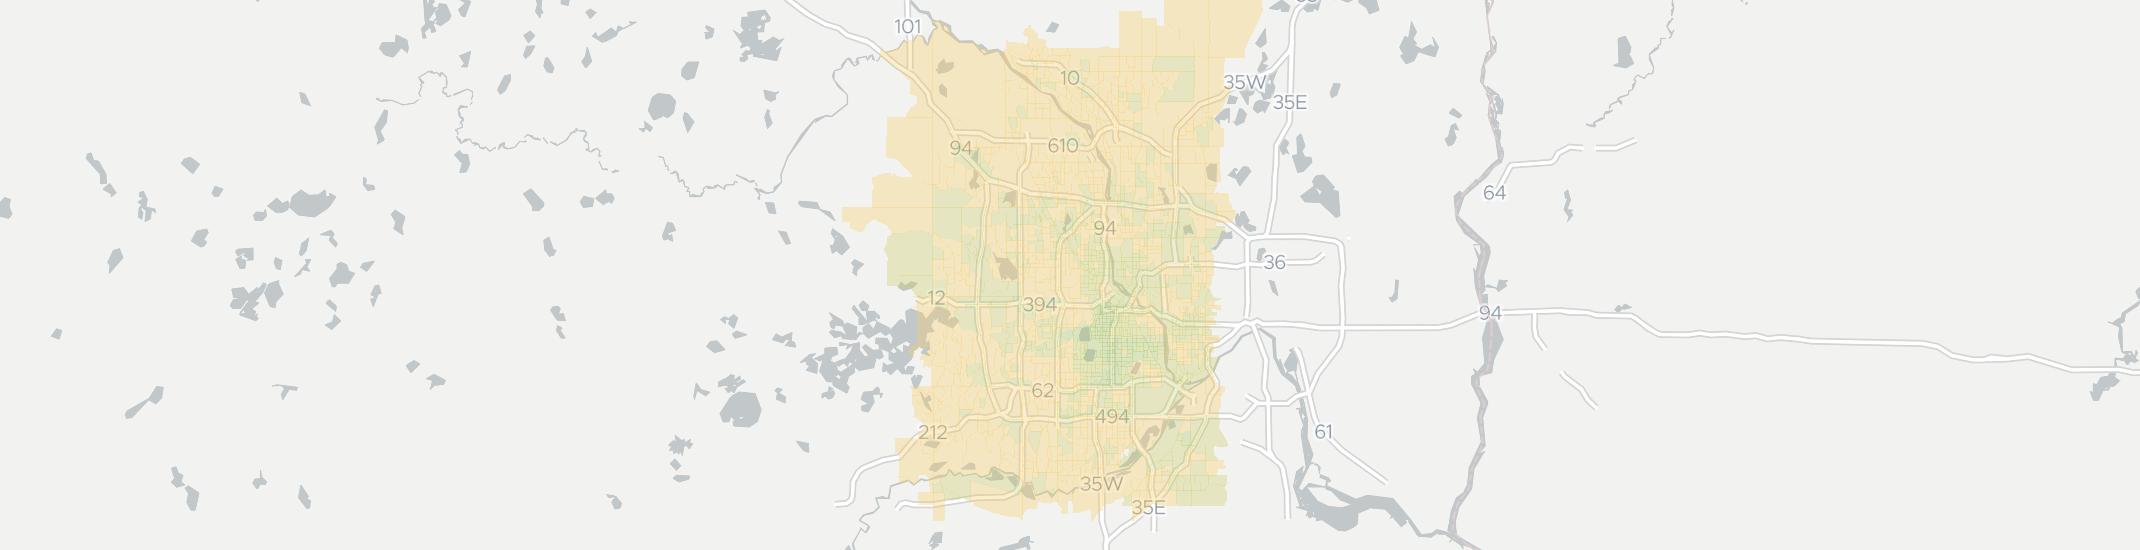 Minneapolis Internet Competition Map. Click for interactive map.